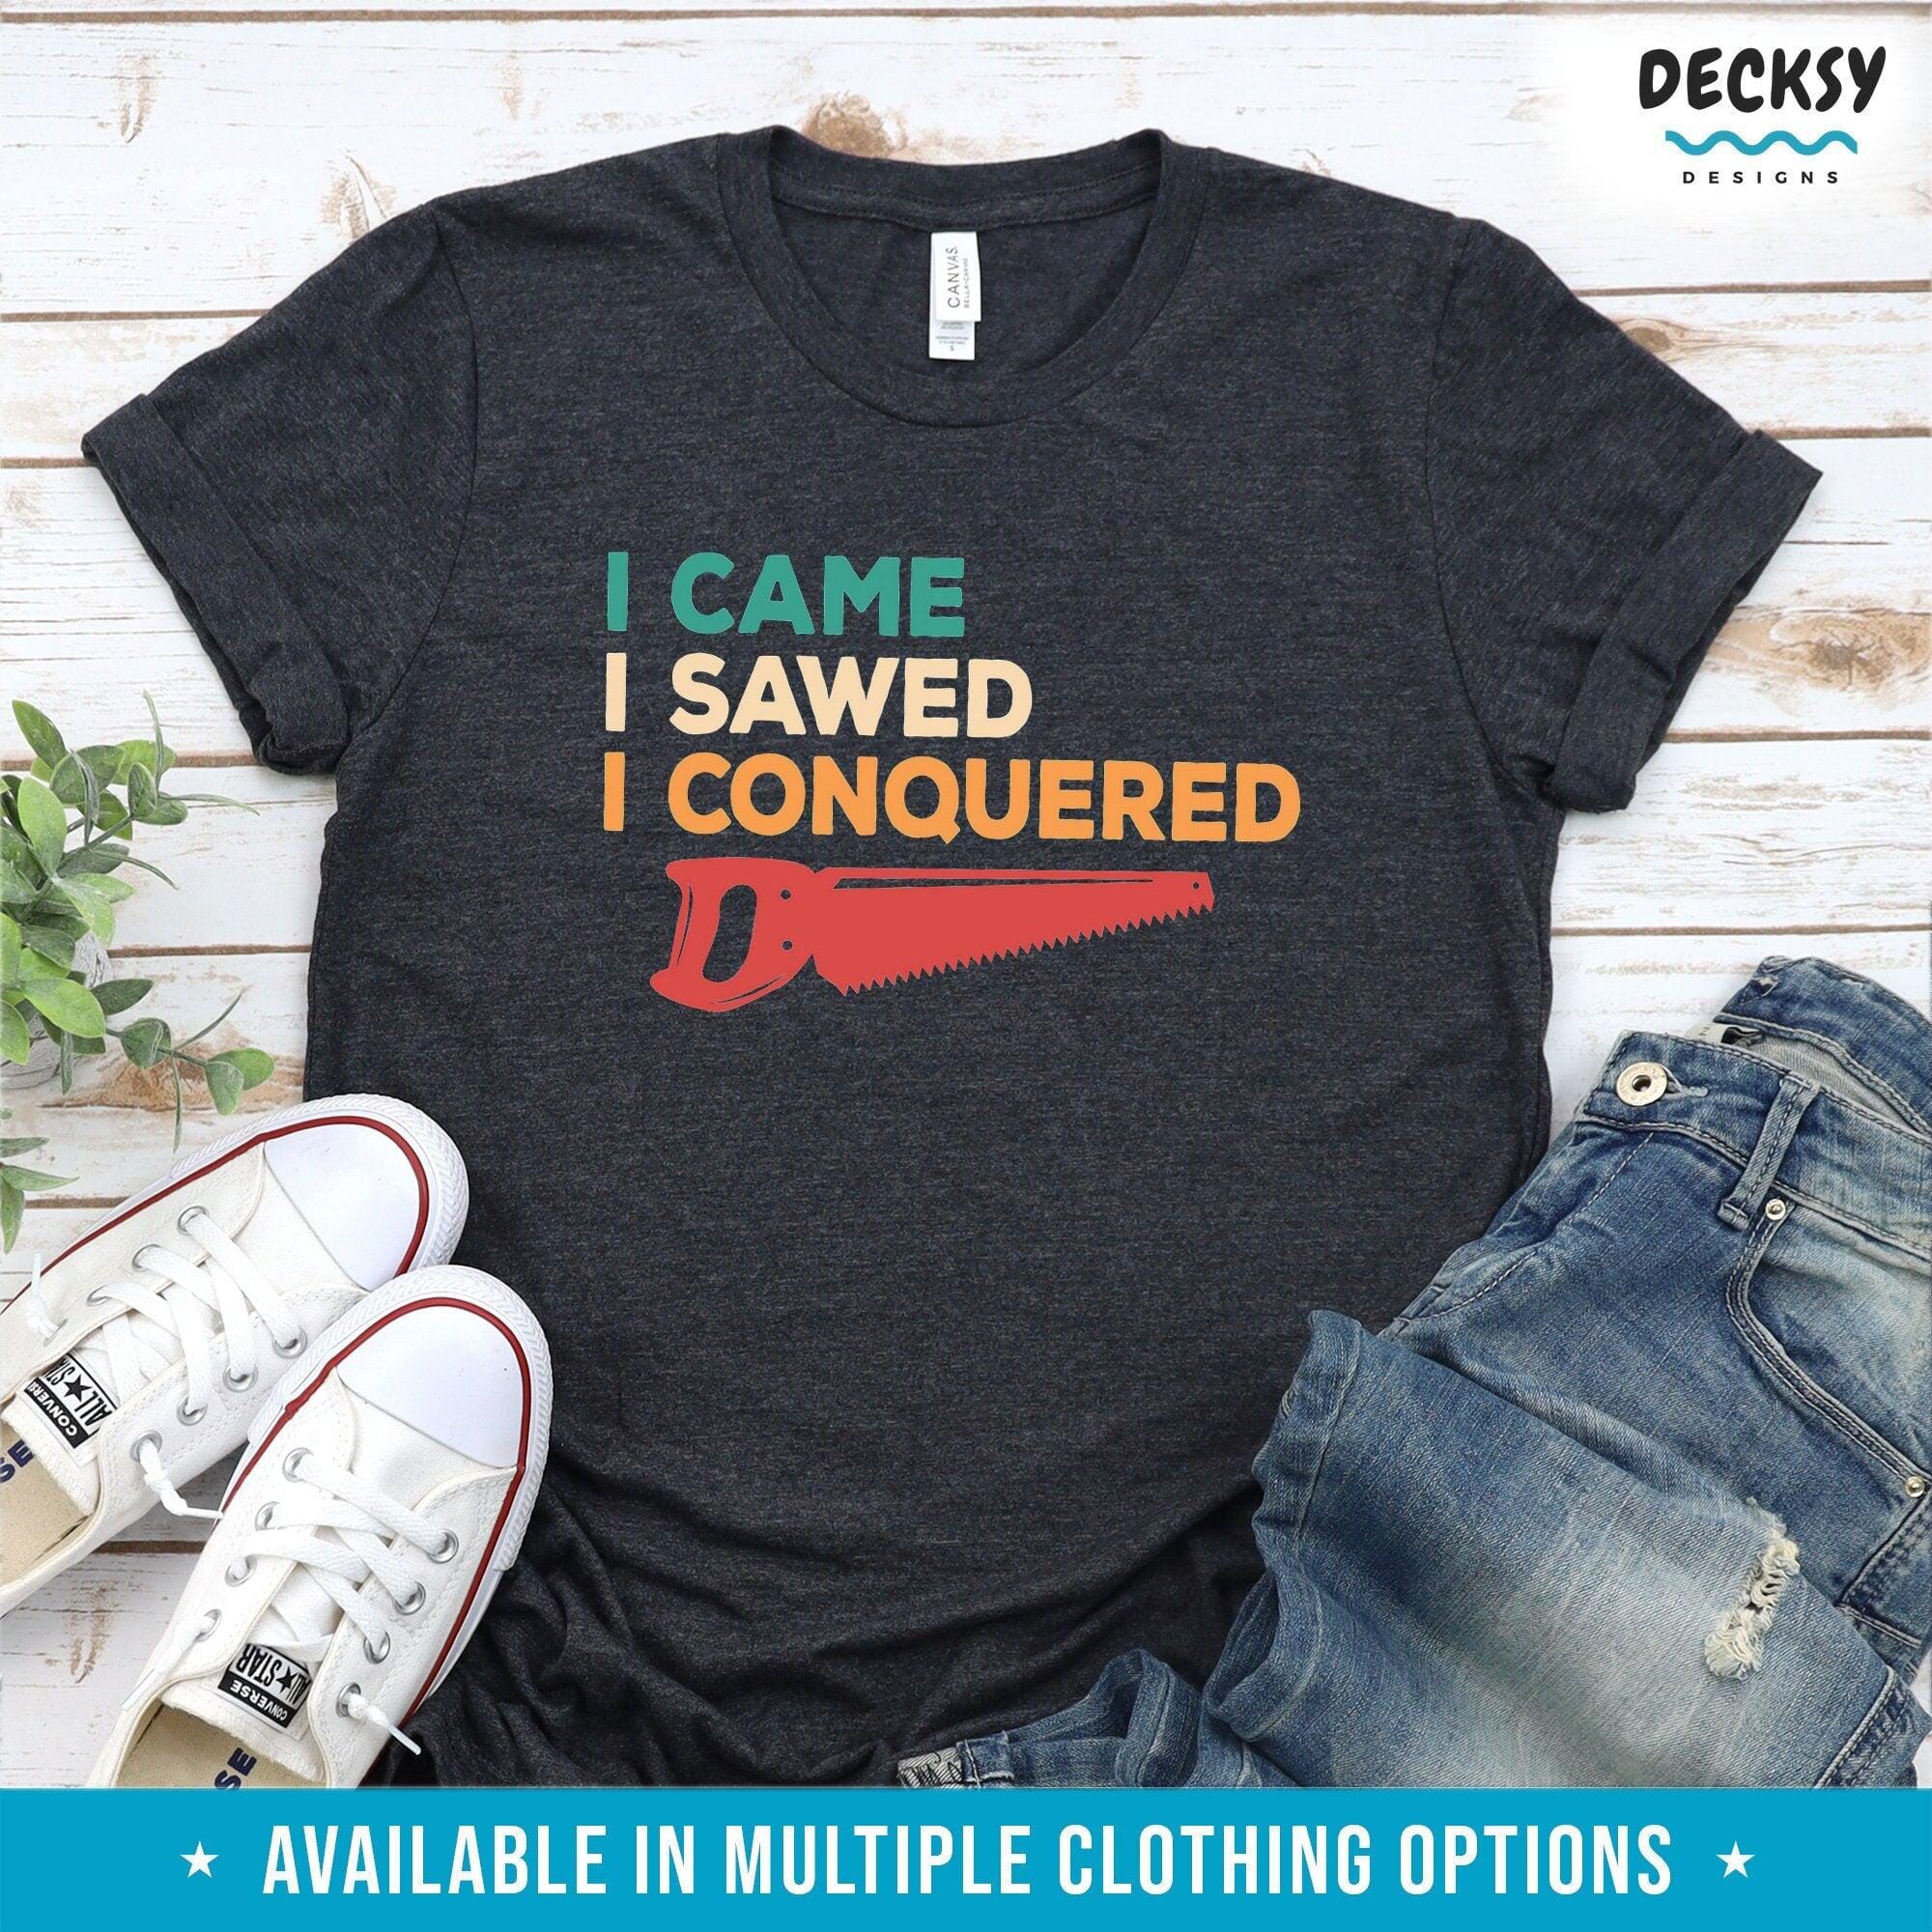 Carpenter Shirt, Woodworking Gift-Clothing:Gender-Neutral Adult Clothing:Tops & Tees:T-shirts:Graphic Tees-DecksyDesigns